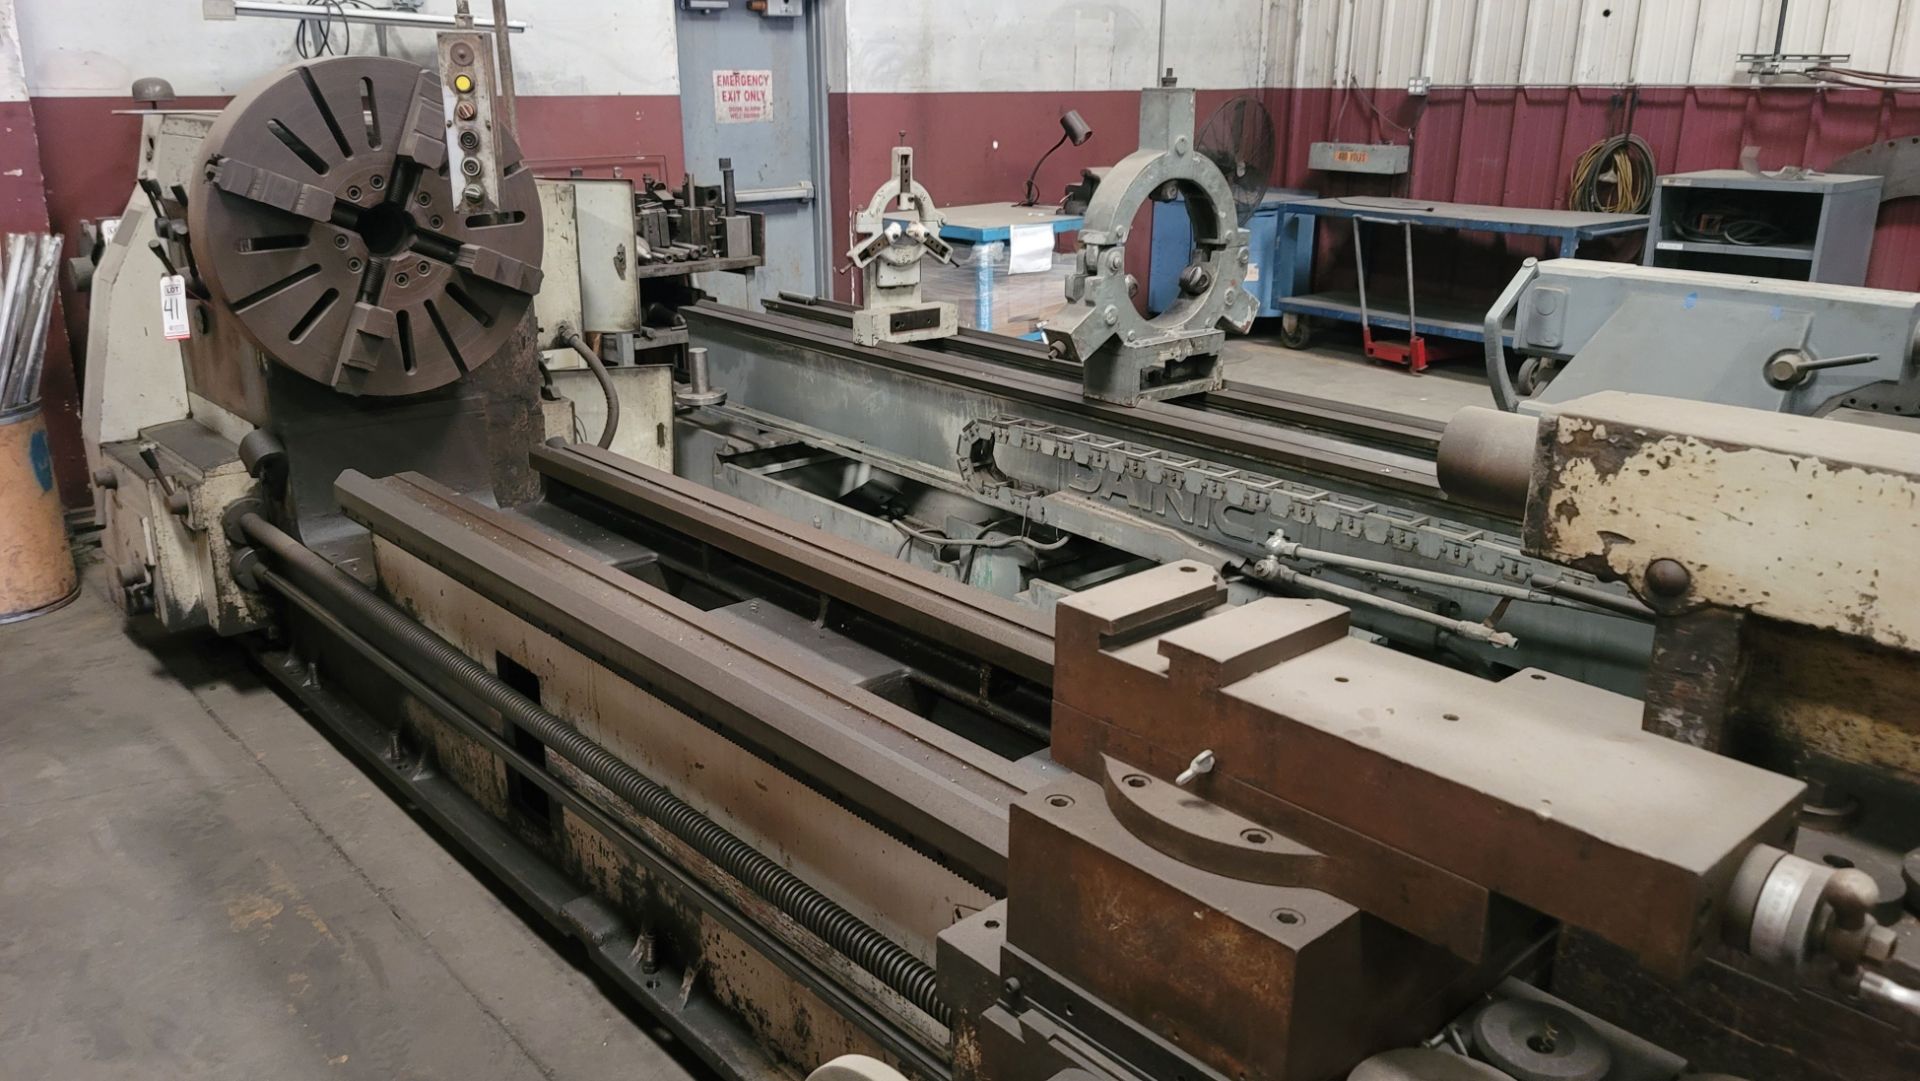 CADILLAC GAP BED ENGINE LATHE, MODEL 32120, 32" X 120", 42" SWING IN GAP, TAILSTOCK, S/N 267014 - Image 7 of 10